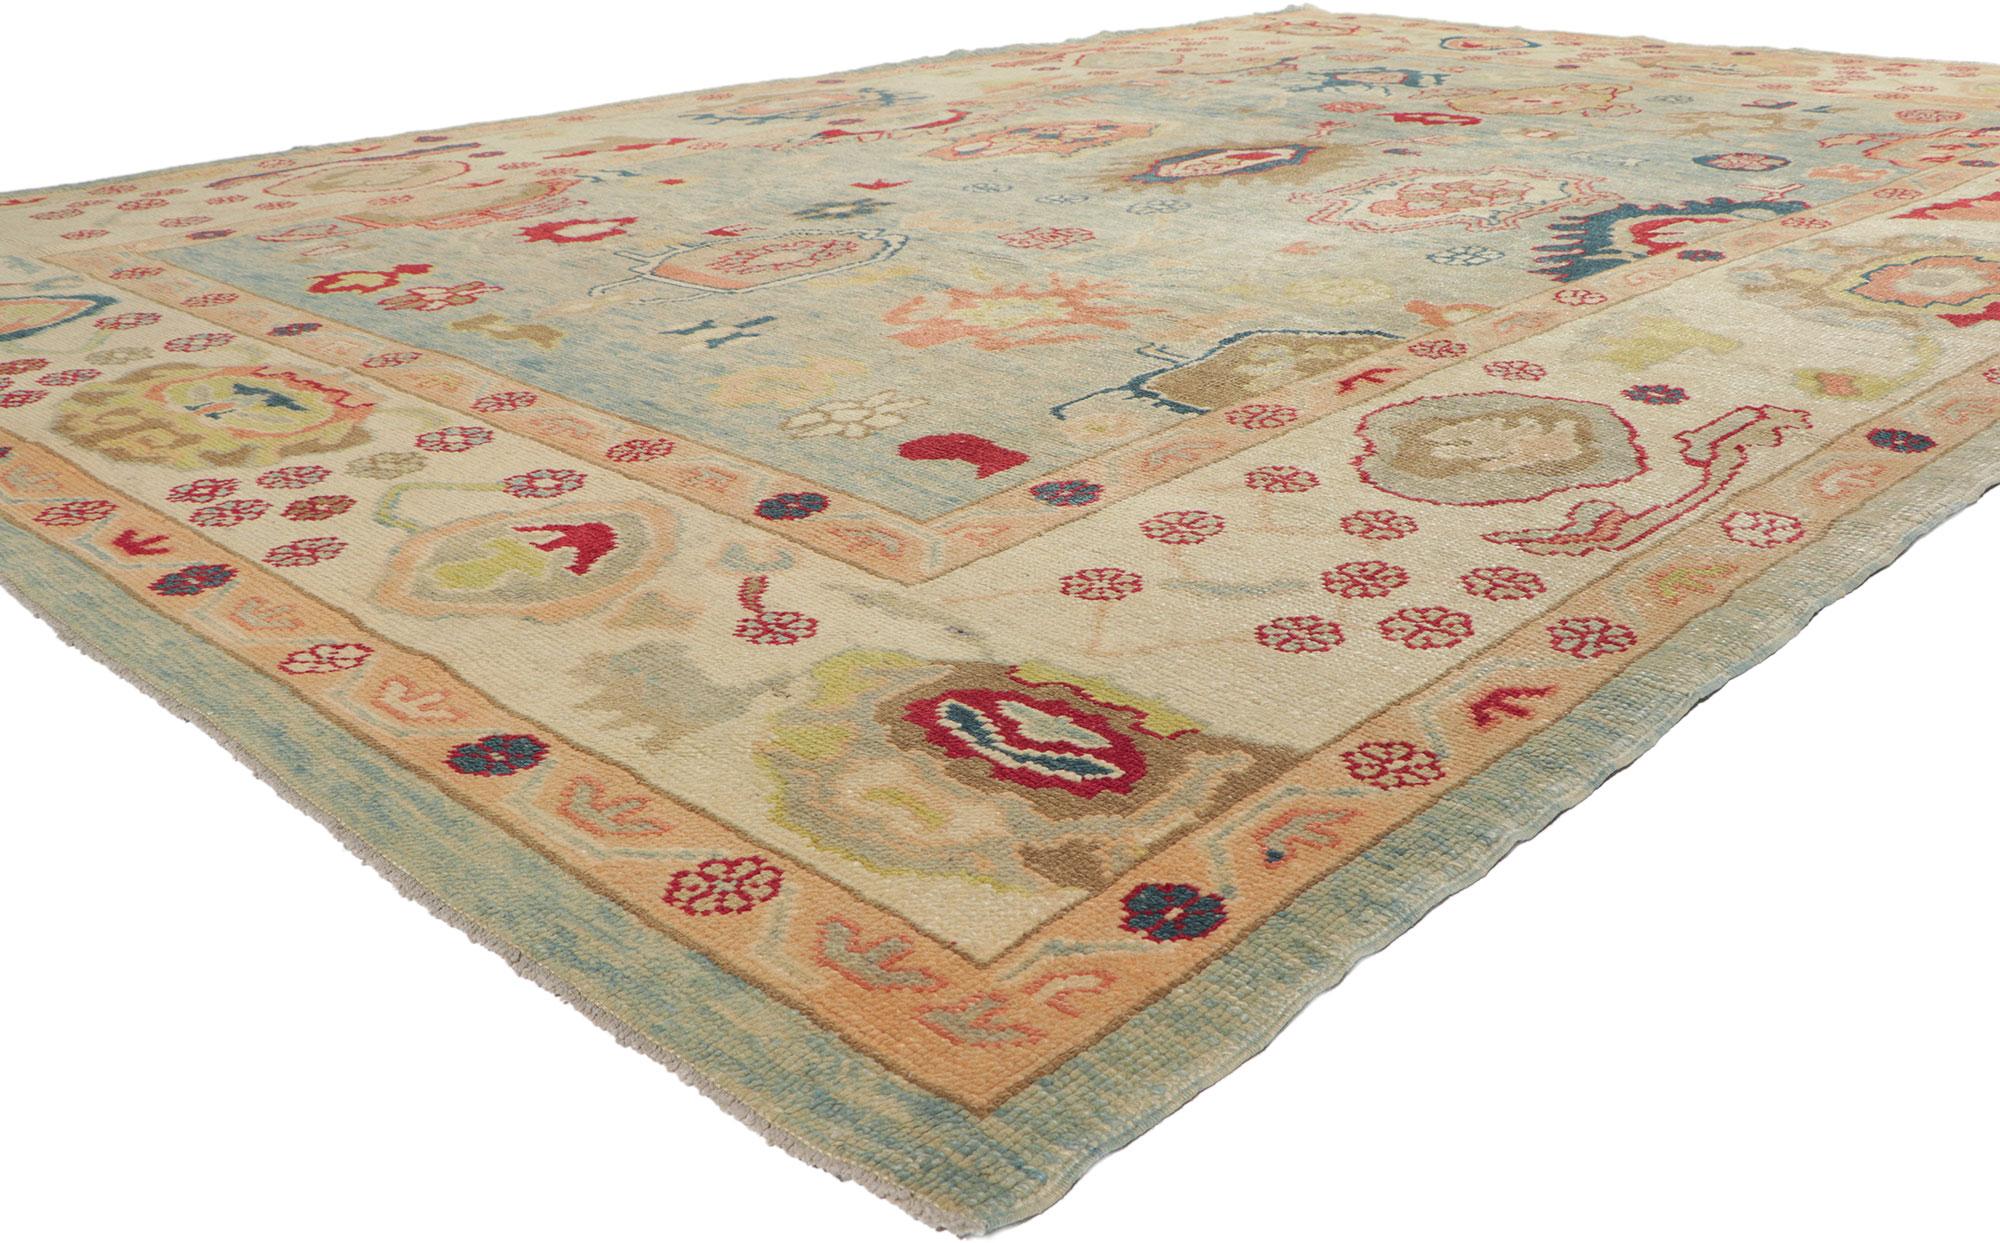 53813 New Turkish Oushak rug with Modern Style 09'08 x 14'00. Polished and playful, this hand-knotted wool contemporary Turkish Oushak rug beautifully embodies a modern style. The abrashed bluish colored field features an array of Harshang motifs,